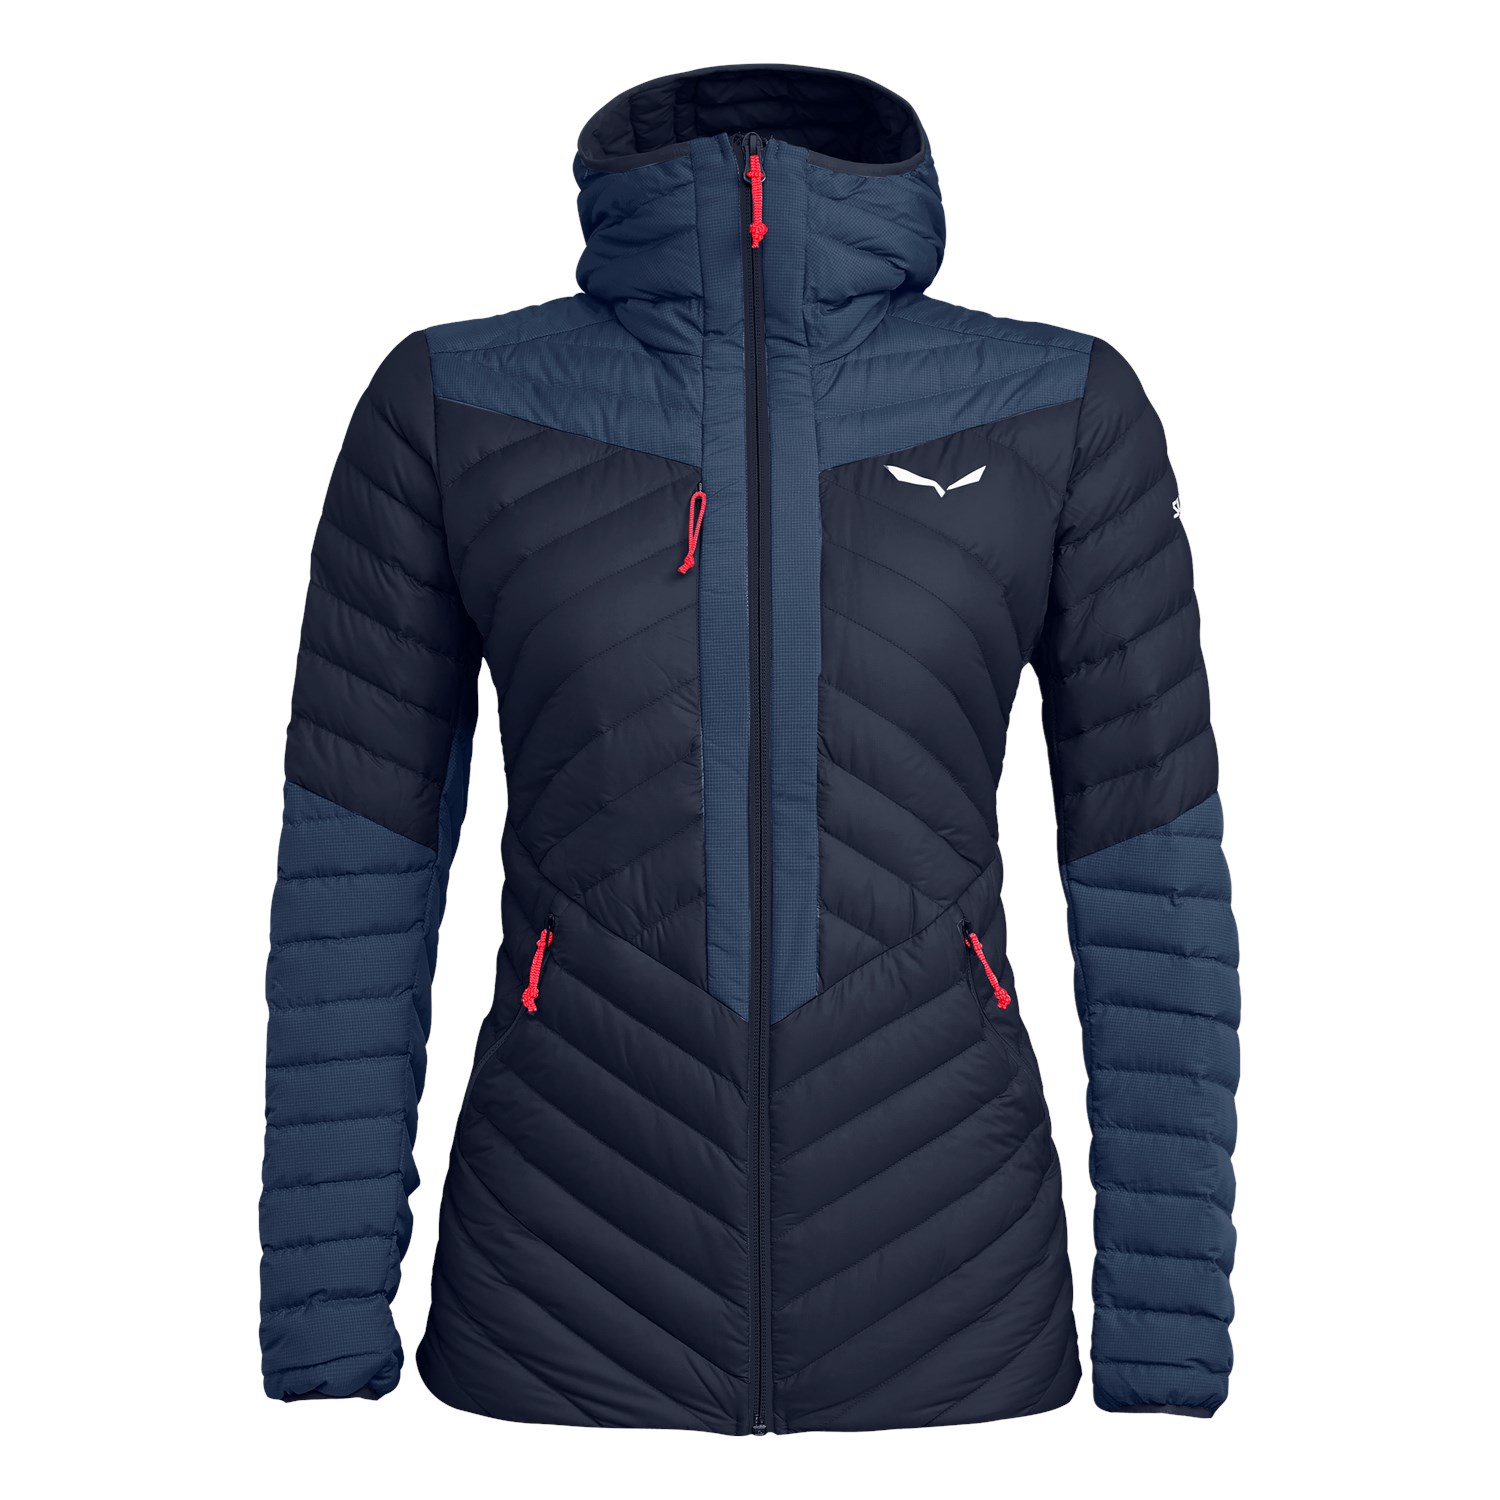 Details about   Salewa Woolen 2L Hoody W 0300 27332 0300/ Lifestyle Women's Clothing Jackets 